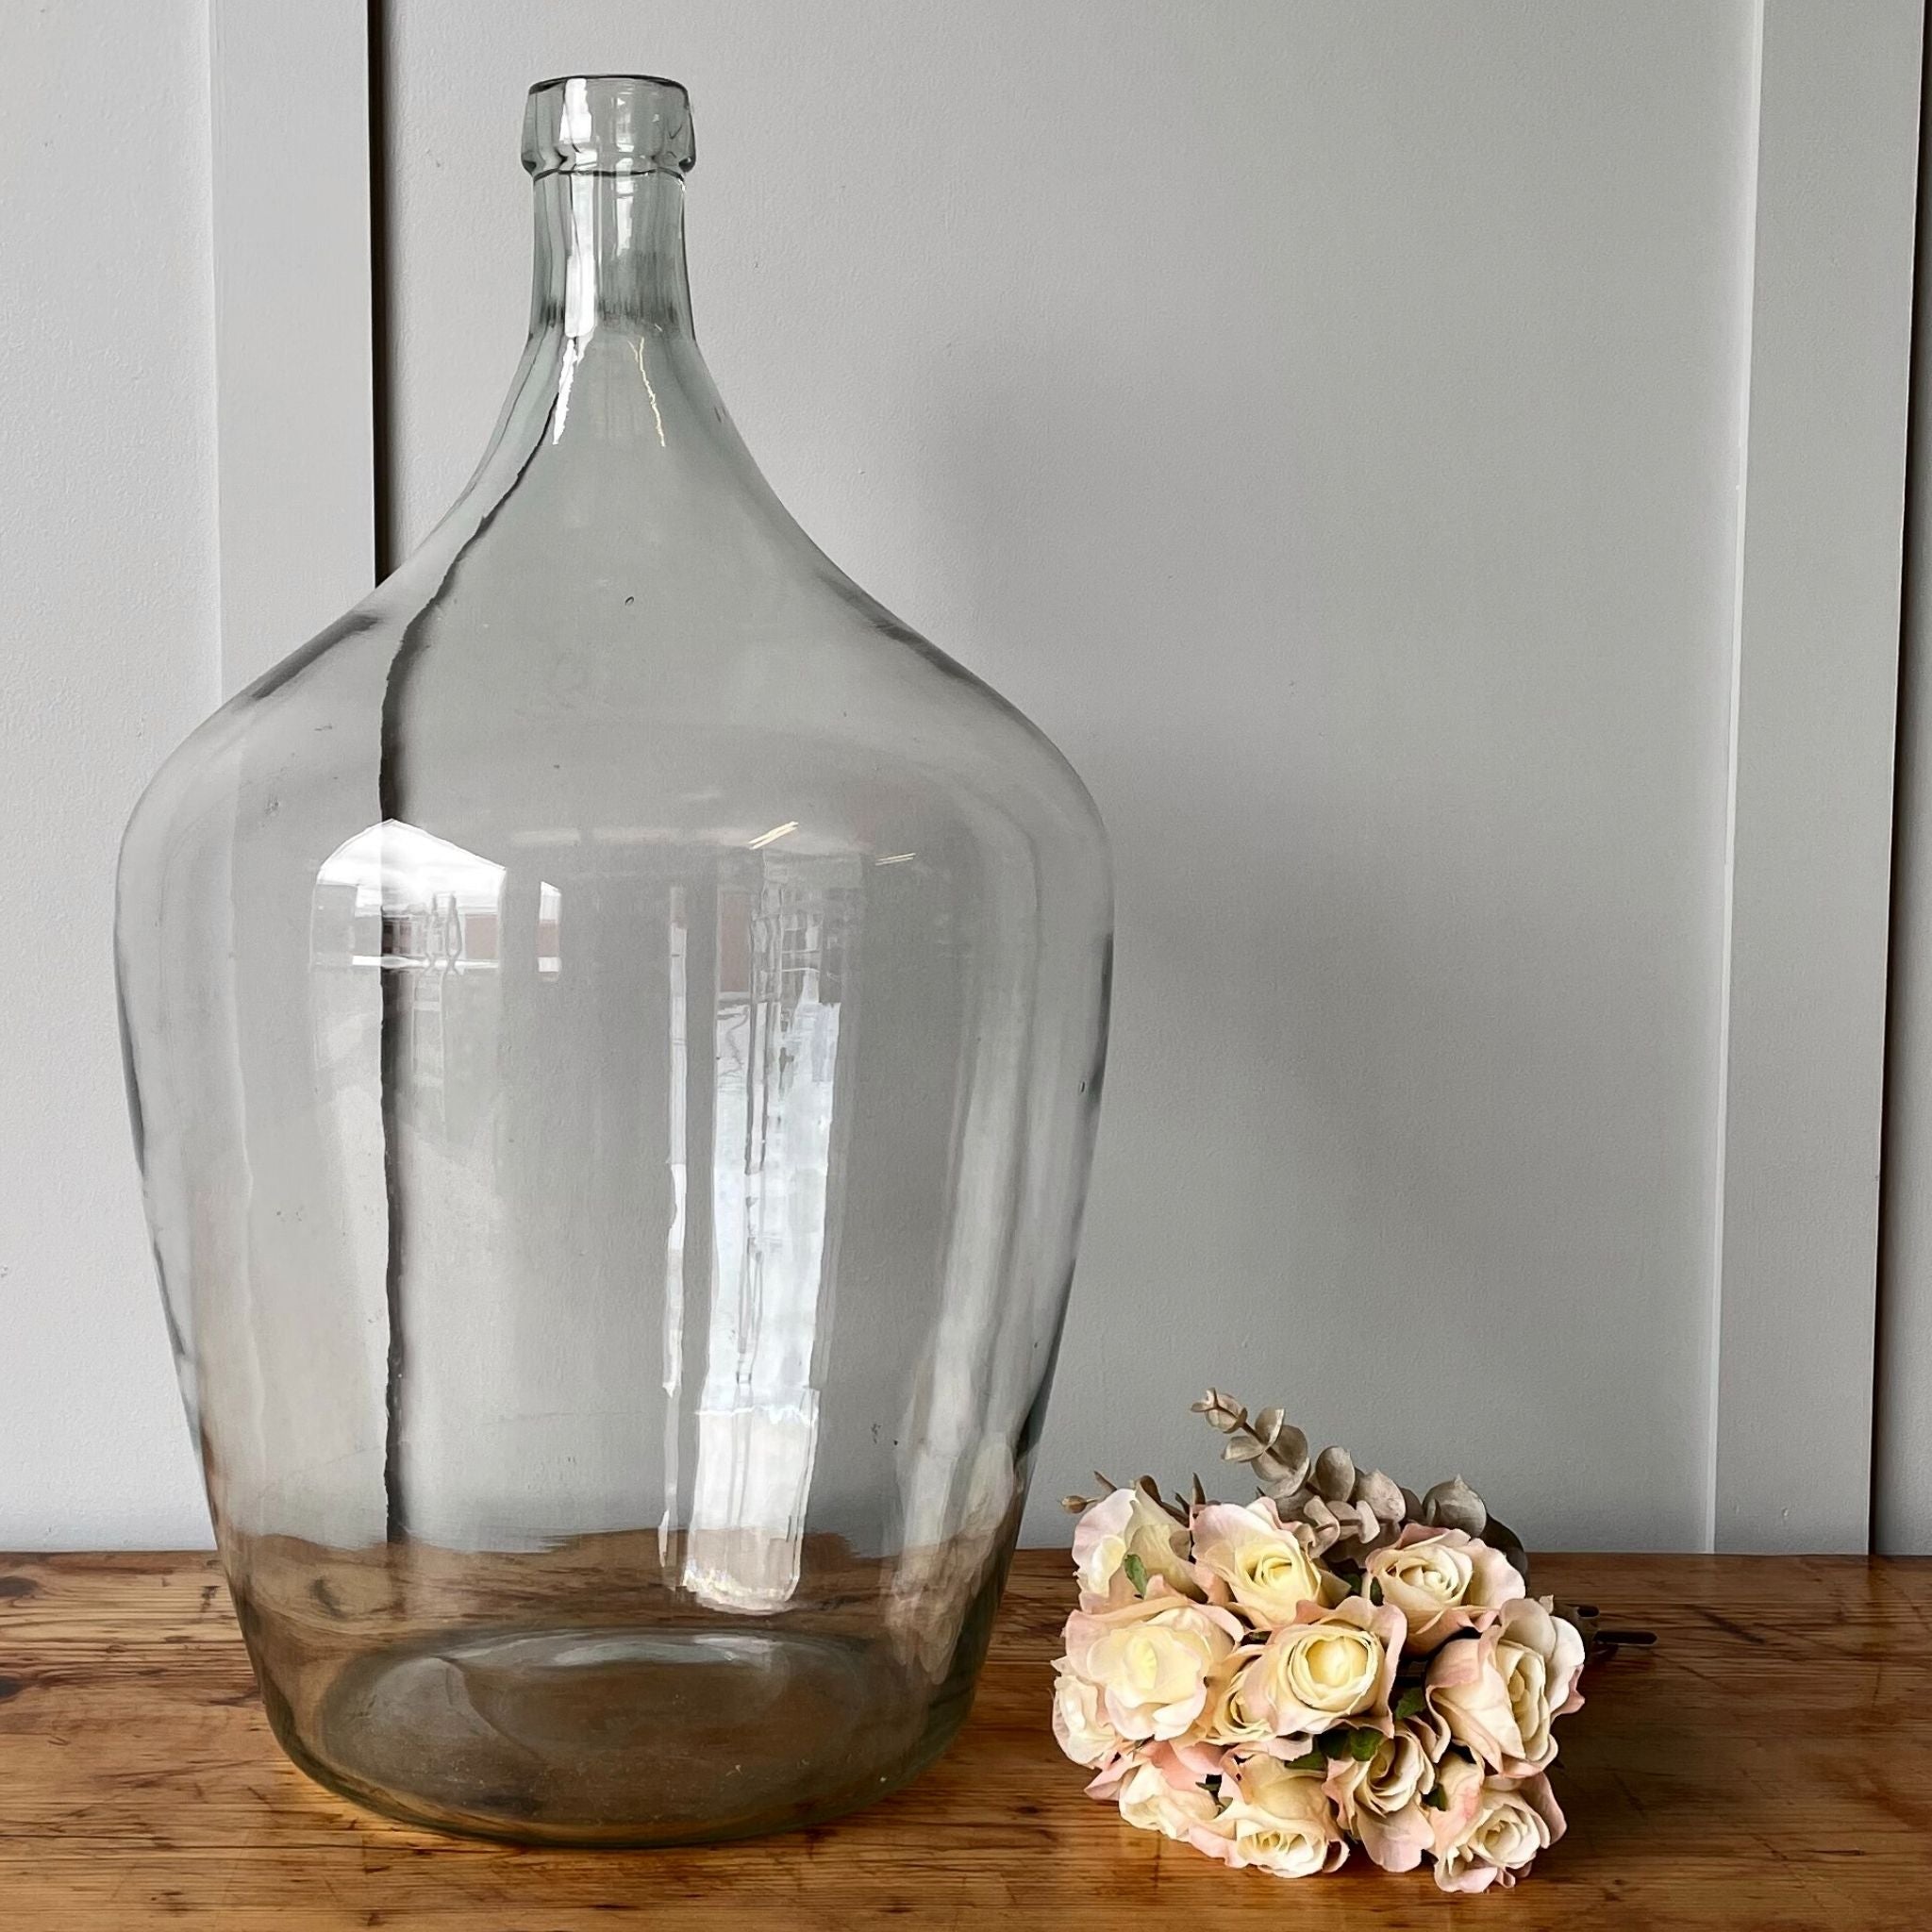 A very large vintage clear glass carboy